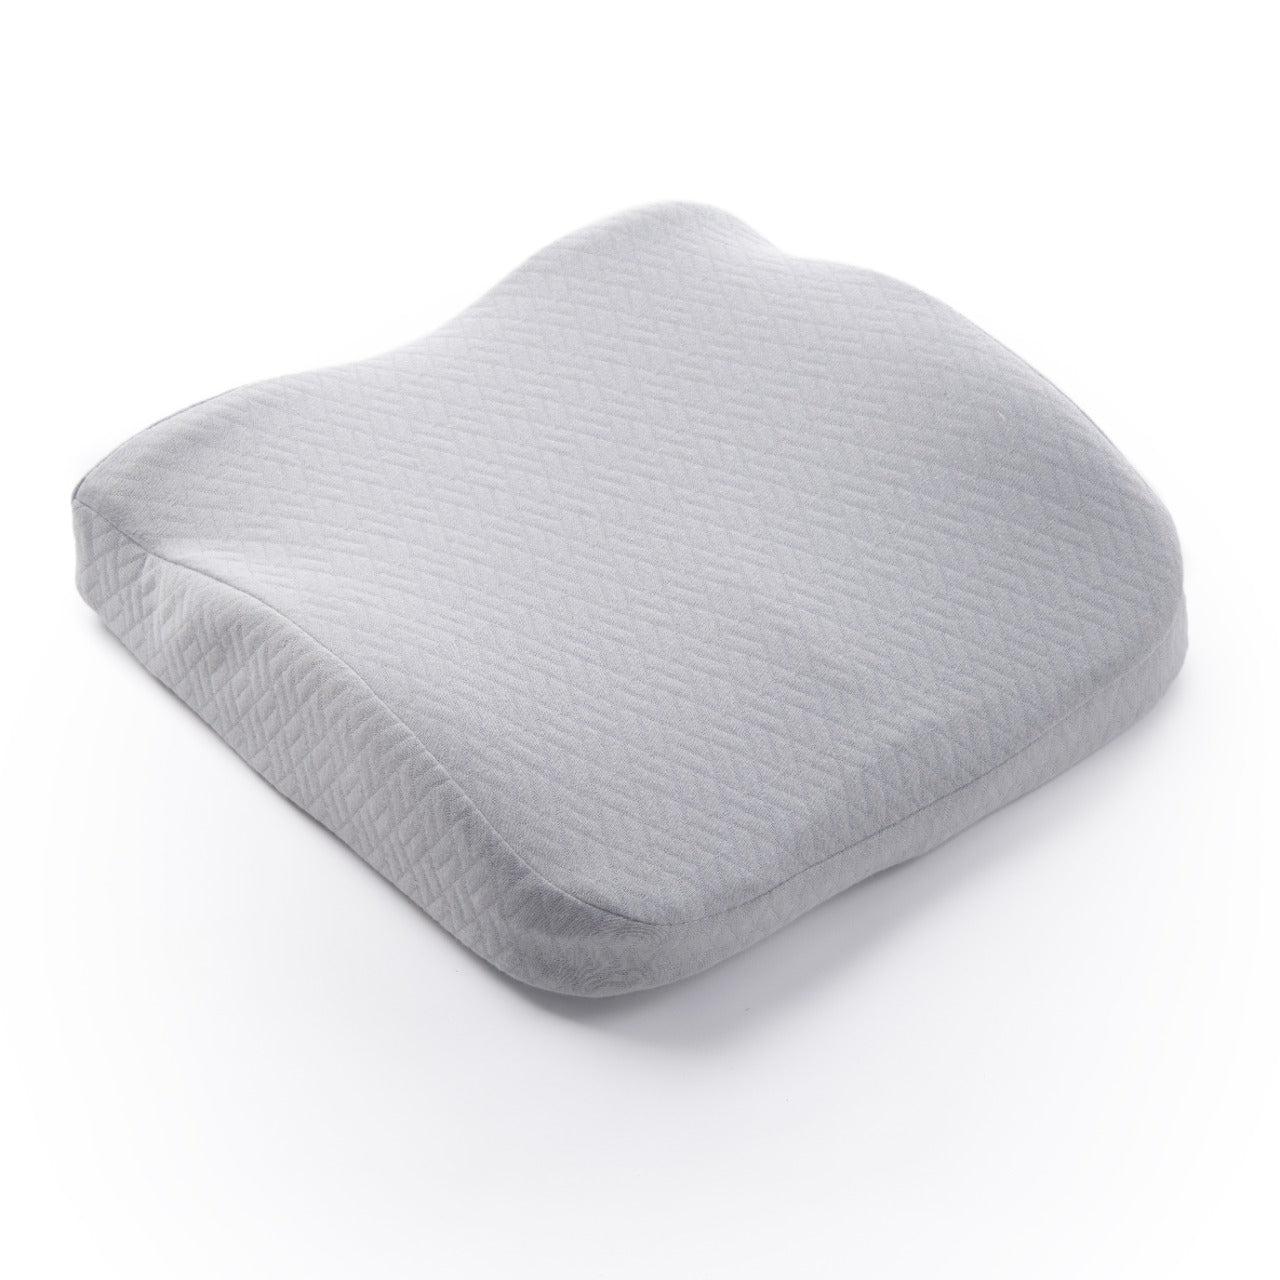 Rafo- Back Support Pillow